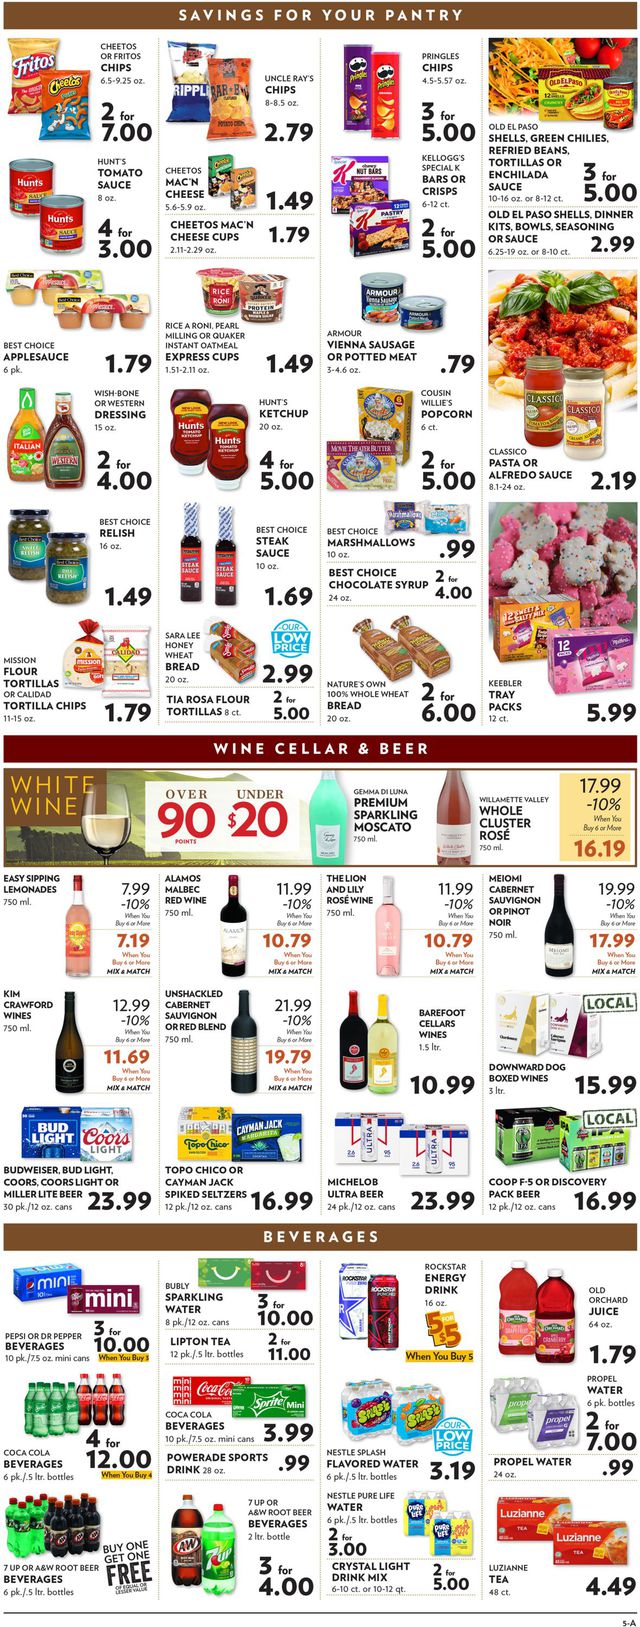 Reasor's Ad from 07/27/2022